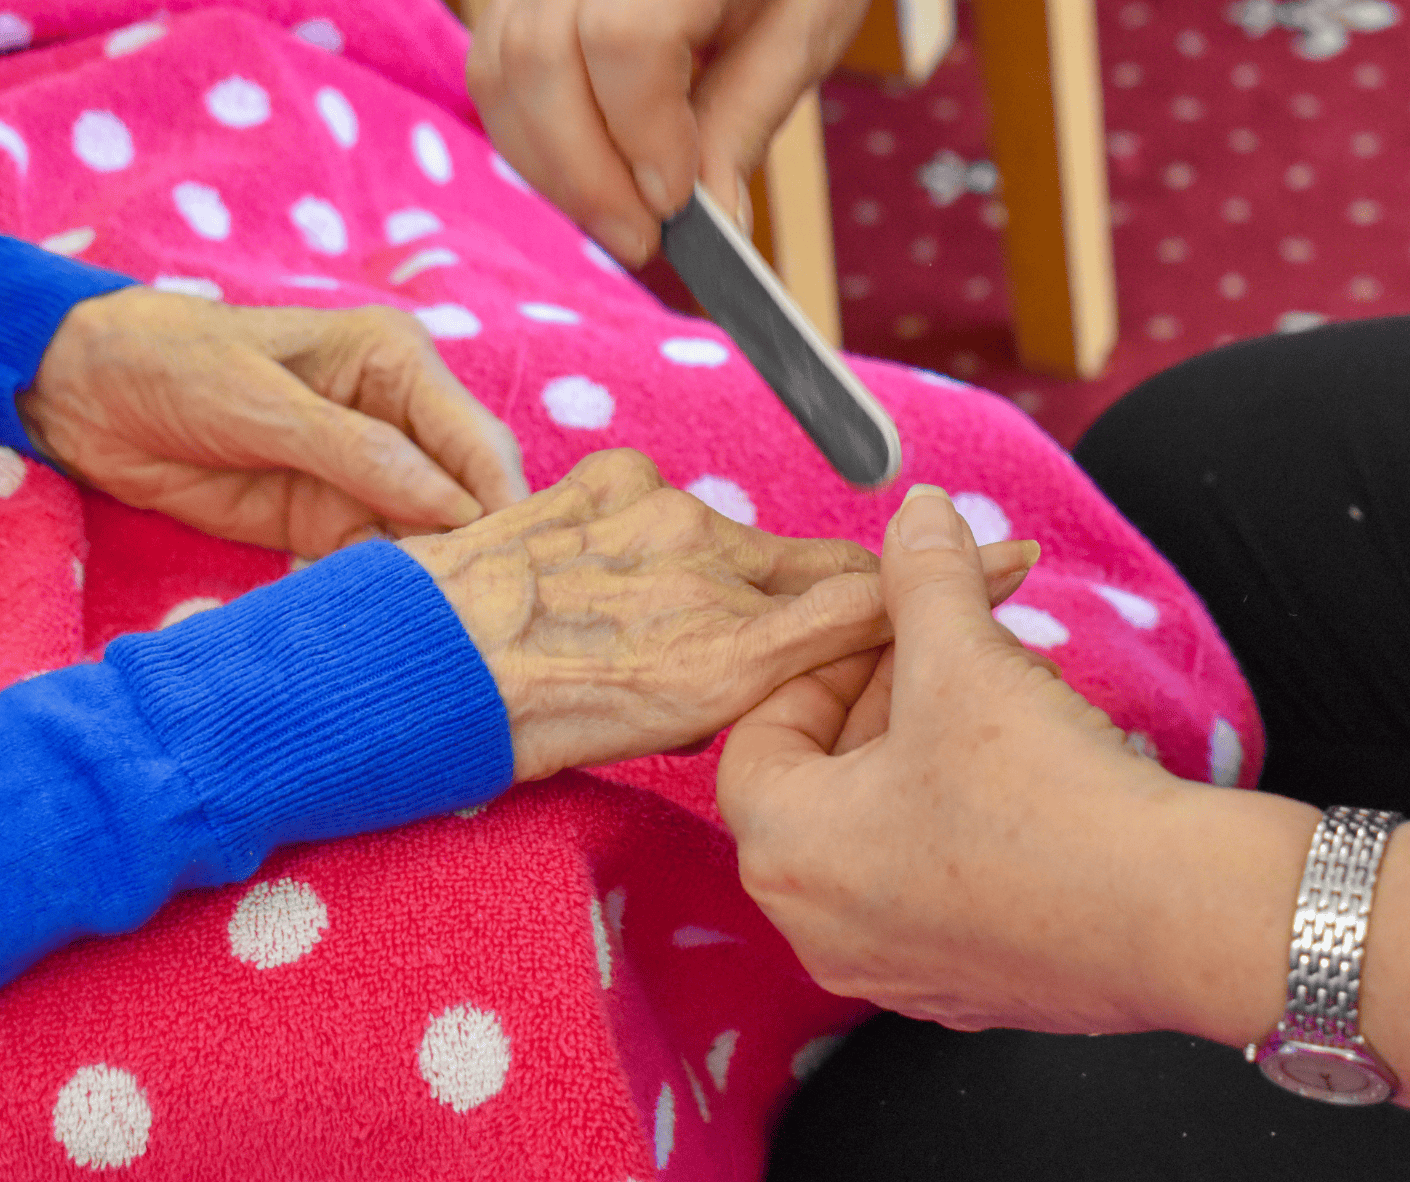 Activities of Orchard care home in Liverpool, Merseyside